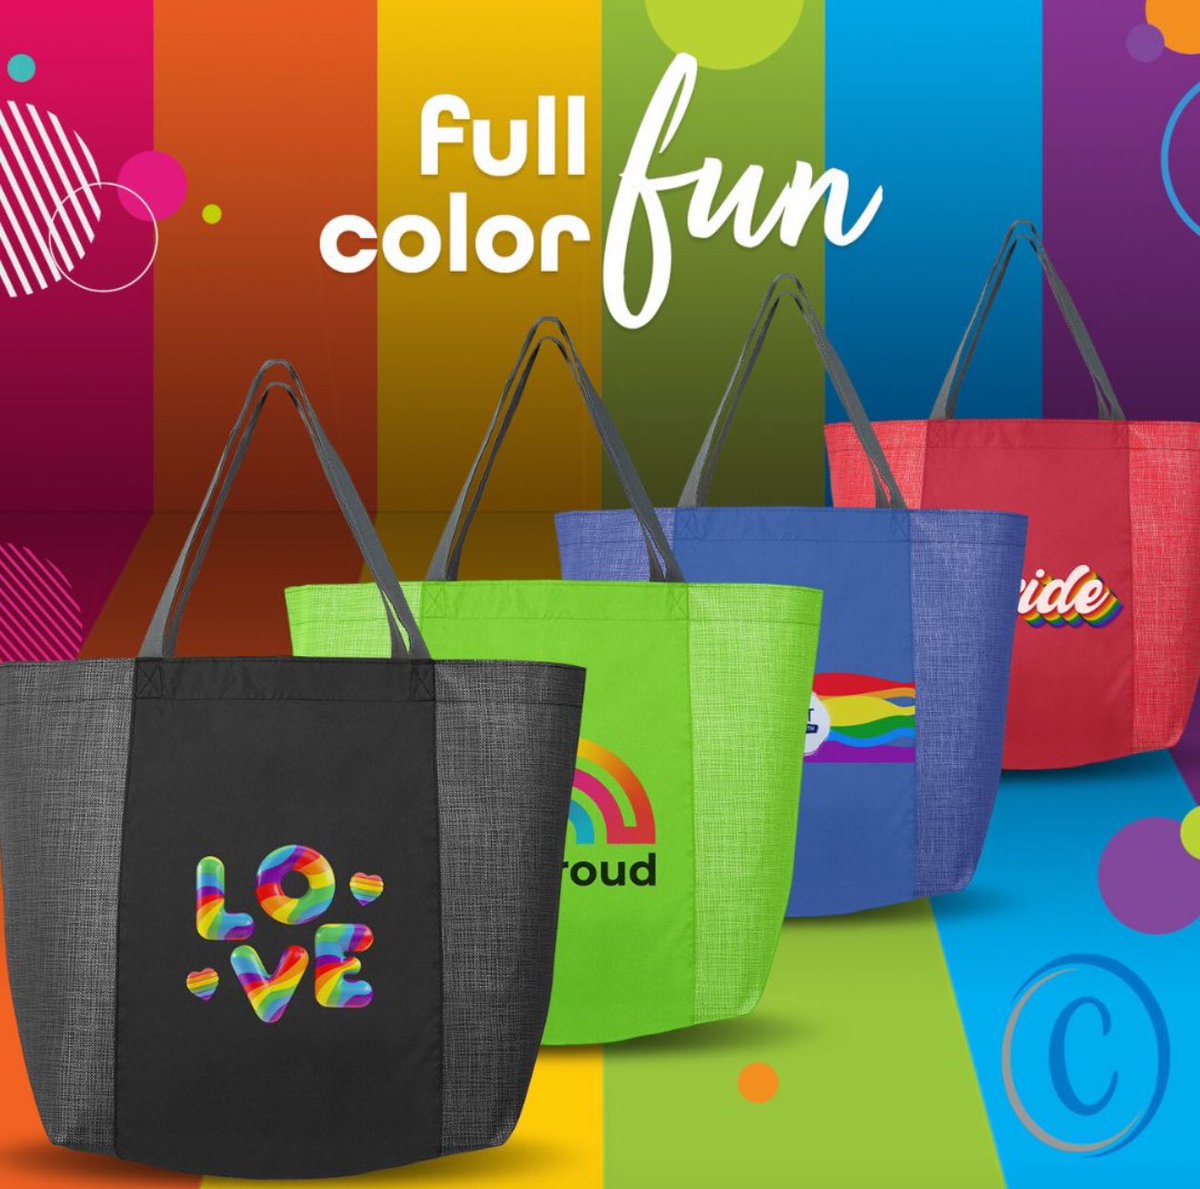 #Totebags that are full #colour fun!  Looking to make a #promomarketing splash!?  Our #totebag collection is ready to #decorate with your #logo! 
.
.
#yourlogohere #promotionalproducts #promotionalproductswork #swag #logoprinting #bagprinting #brandedbags #brandedbag #brandedtote